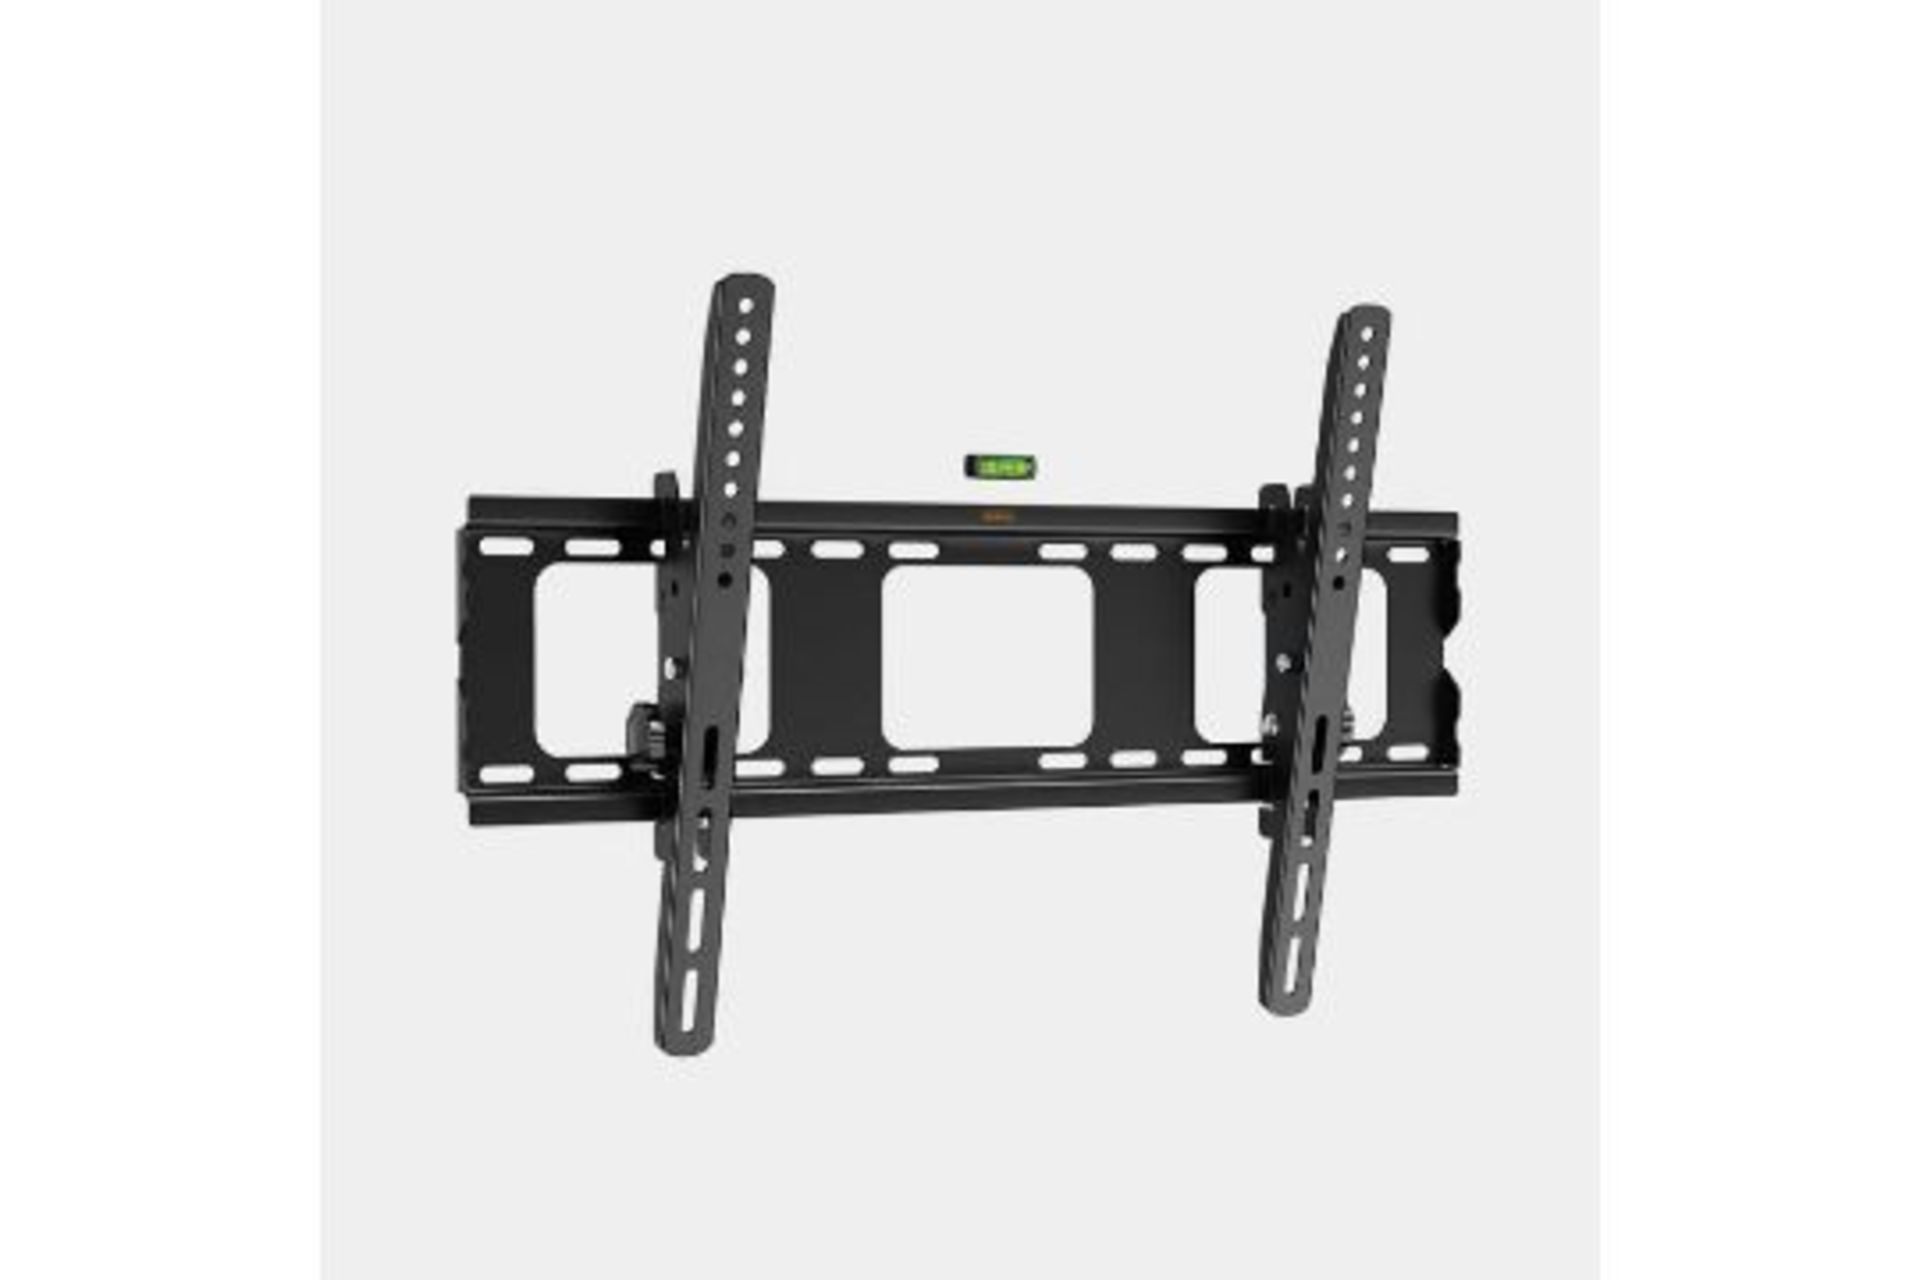 32-70 inch Tilt TV Bracket. - PW. Transform your TV viewing experience with this sleek, tilting wall